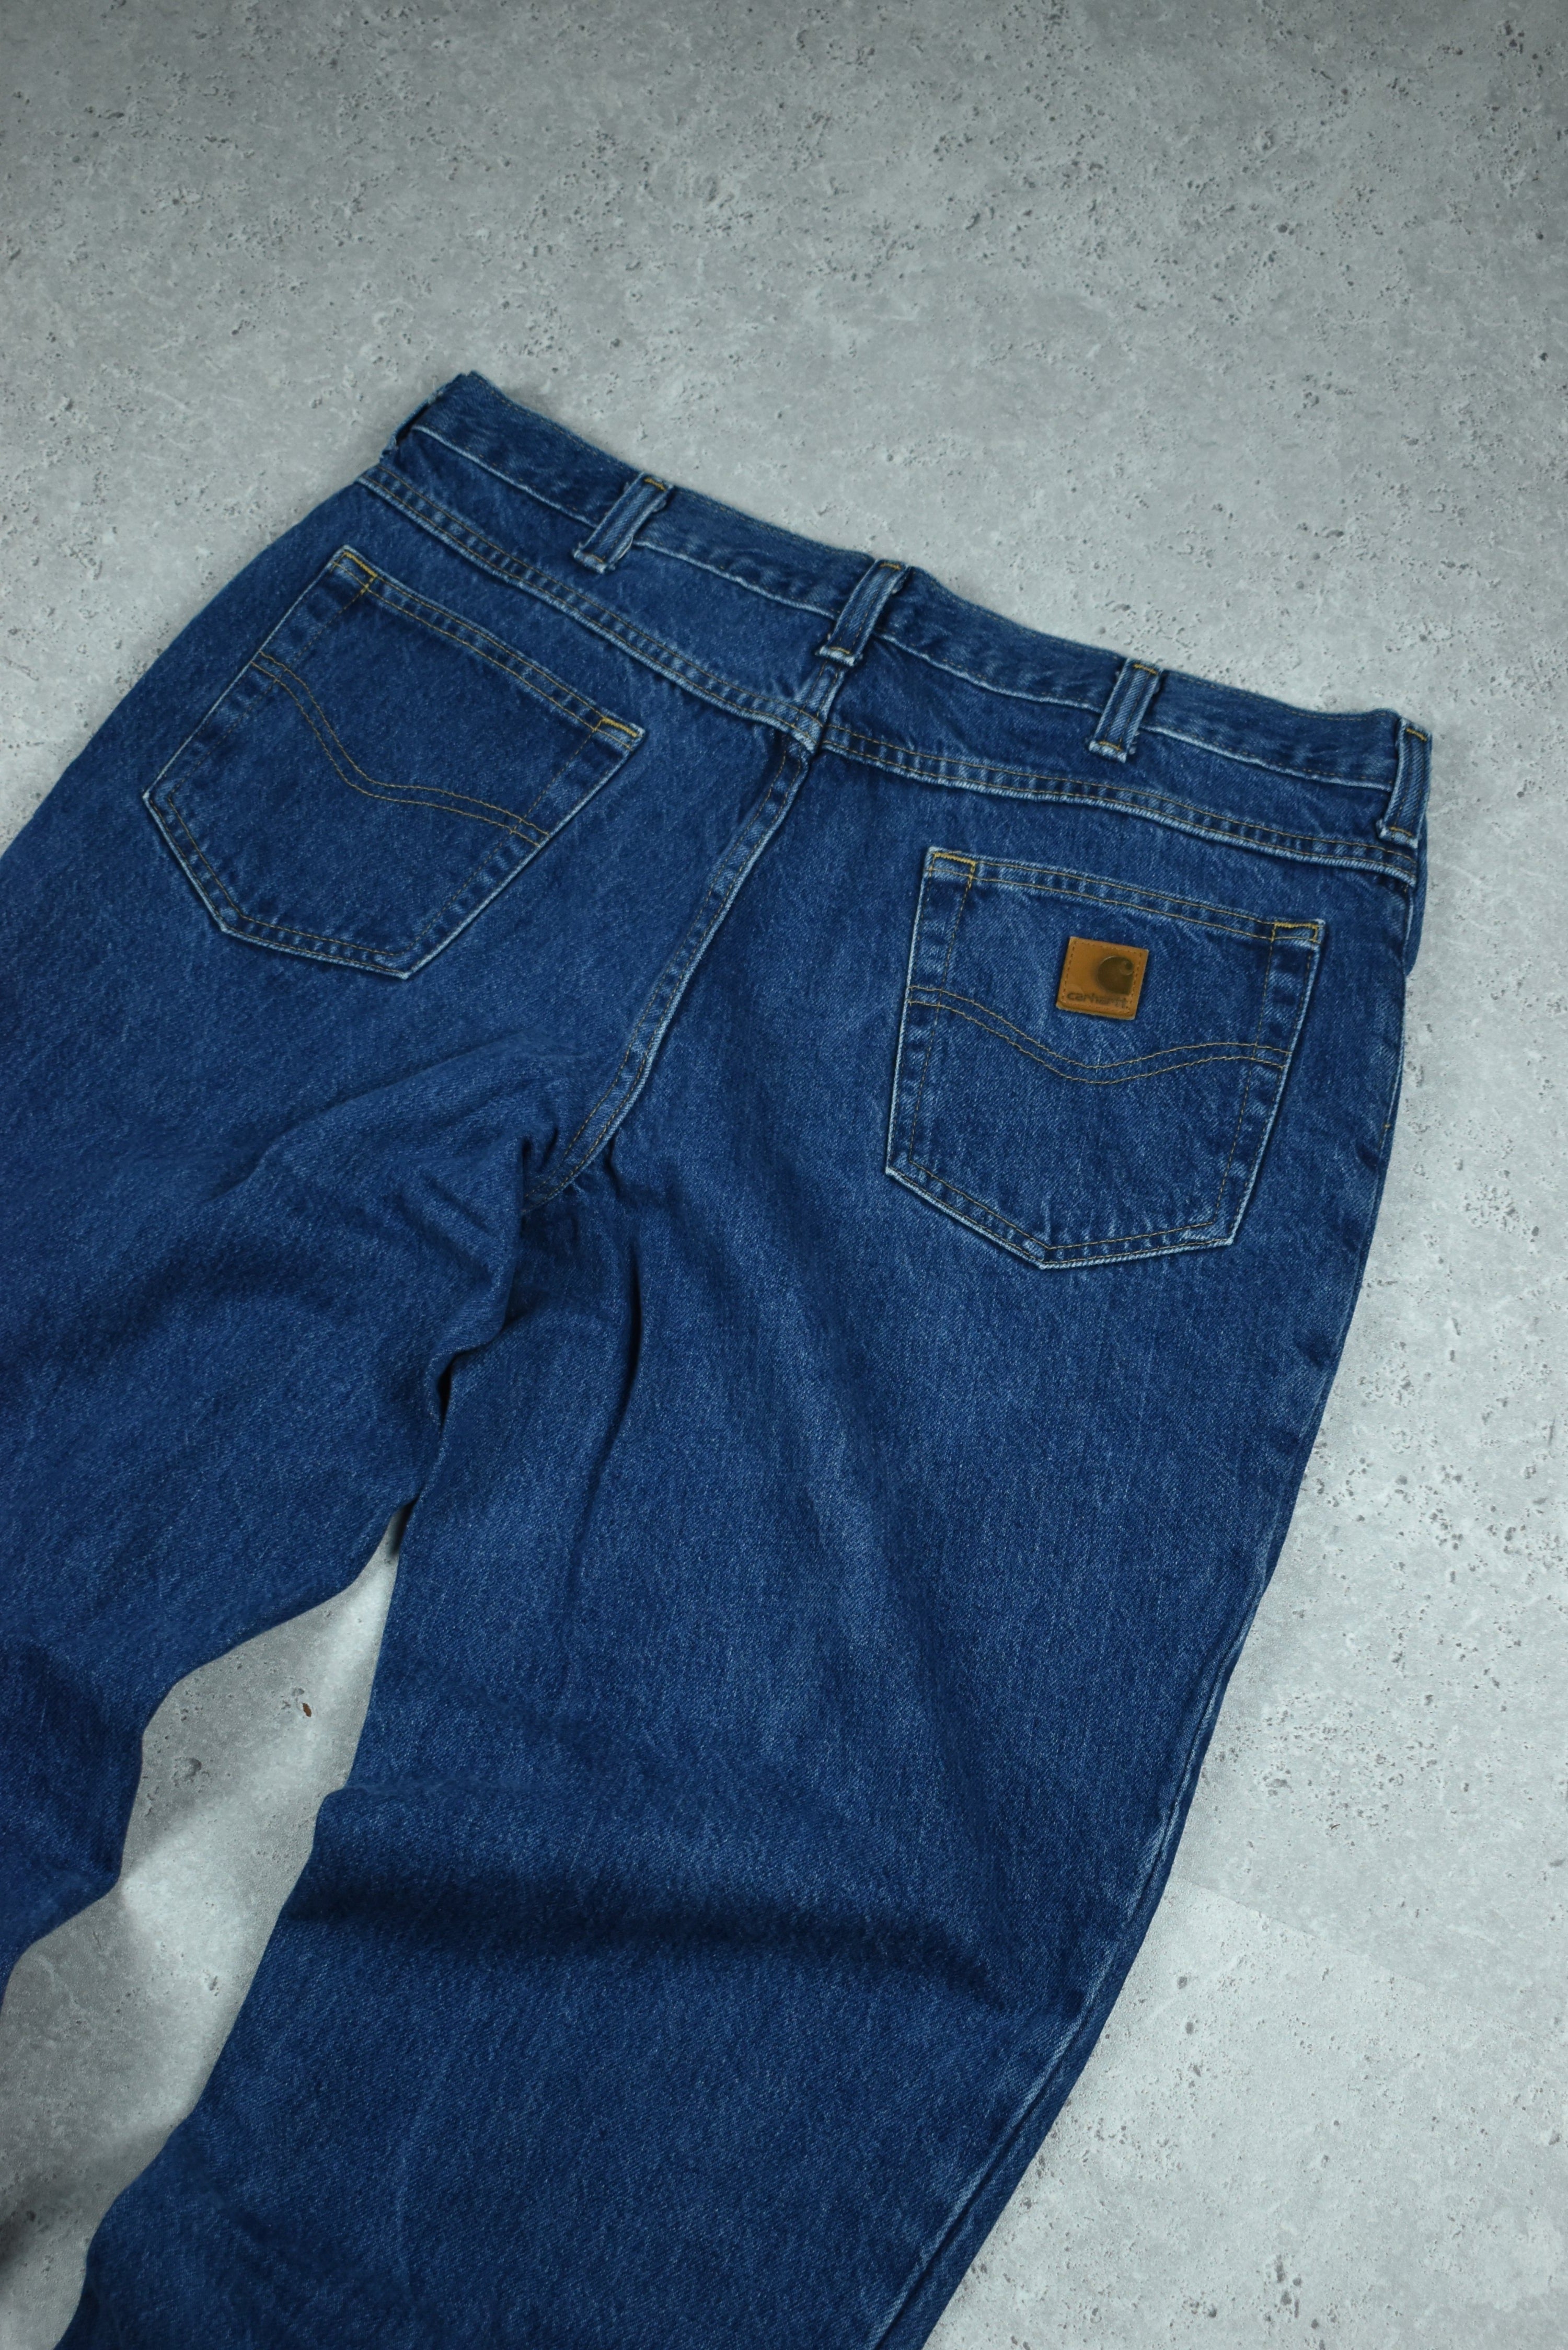 Vintage Carhartt Relaxed Fit Denim Jeans 36x32